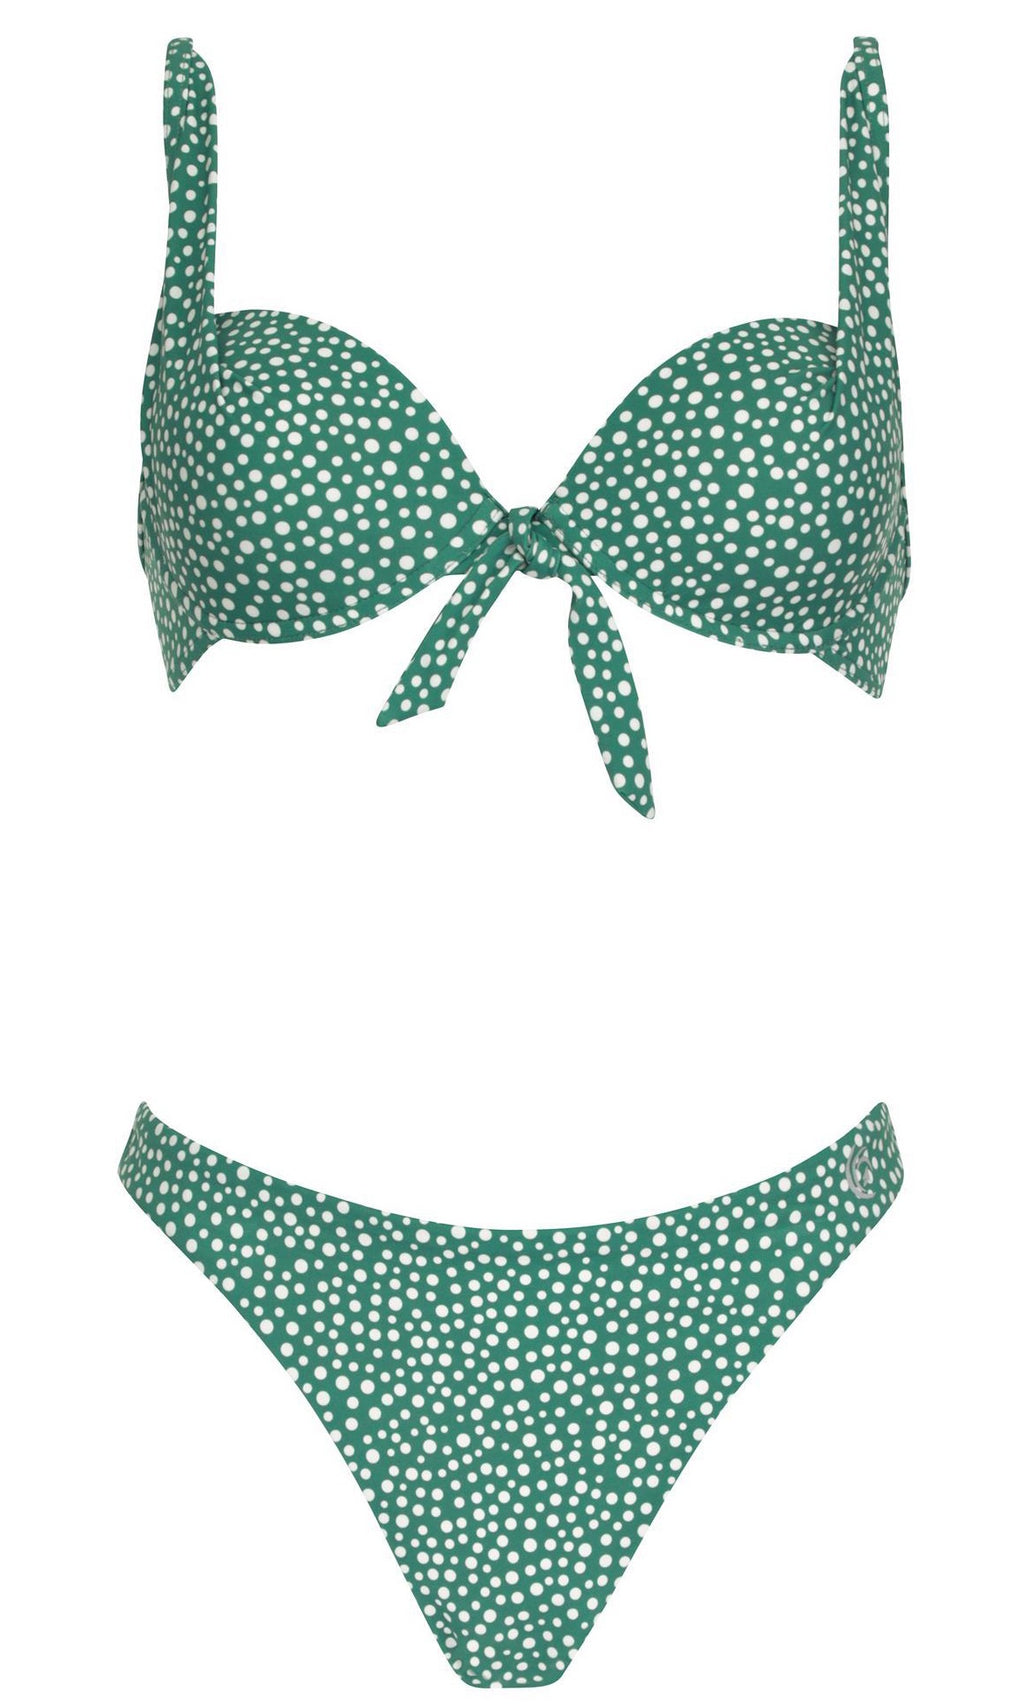 Bikini Set Emerald Park, Special Order A Cup to D Cup